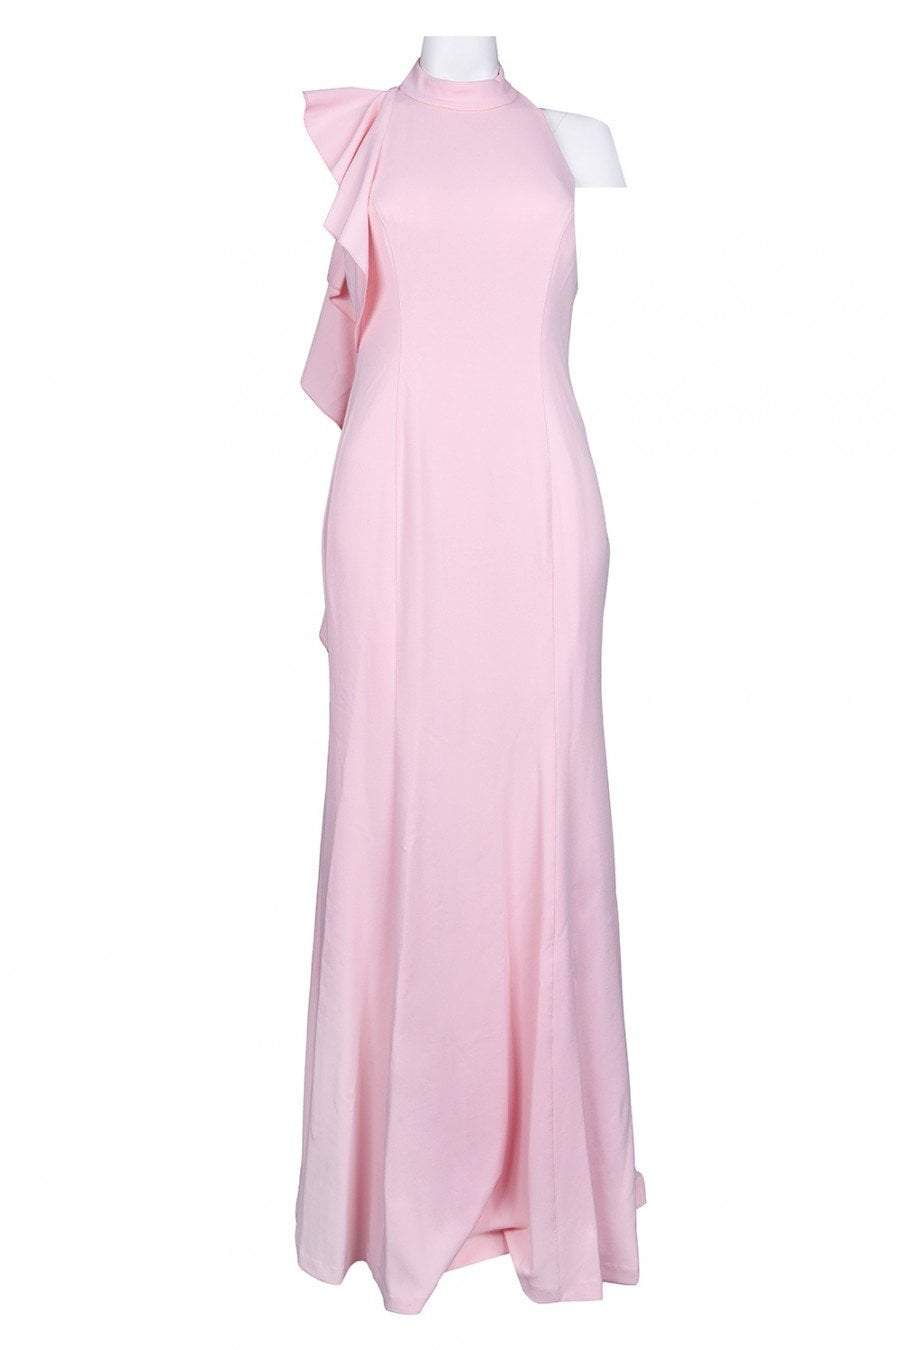 Adrianna Papell - AP1E203268 Ruffled High Neck Trumpet Dress In Pink